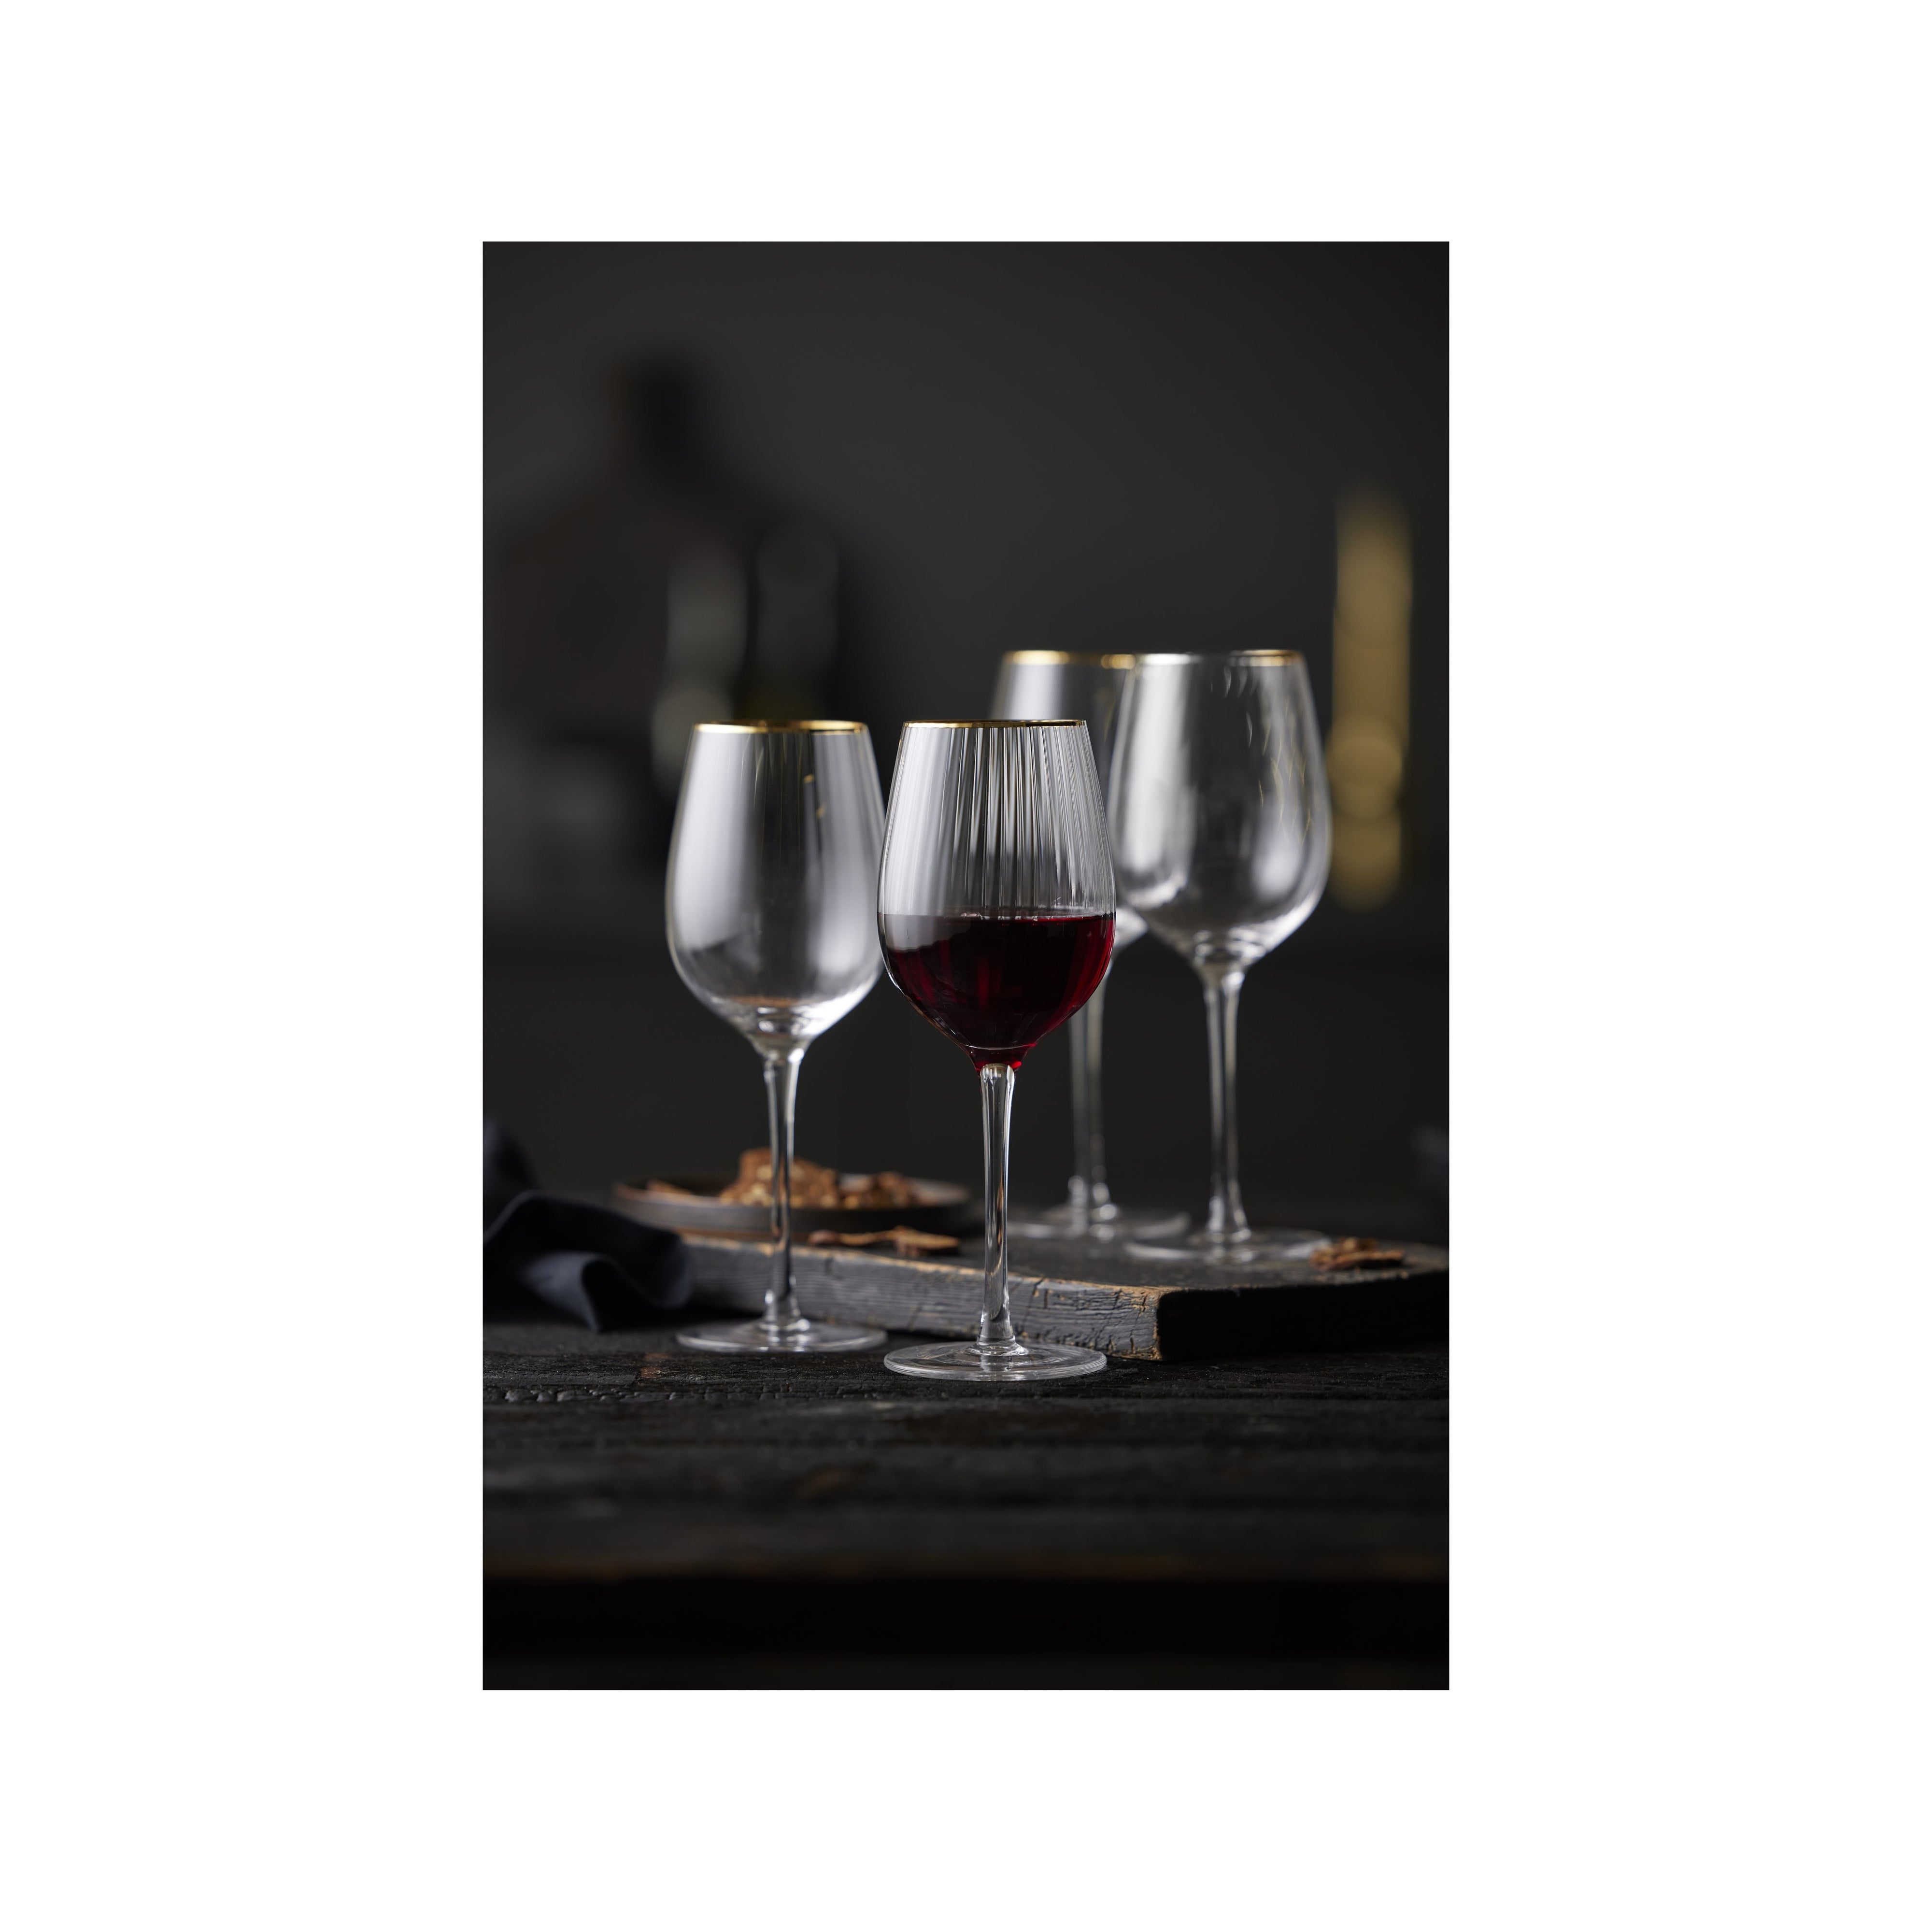 Lyngby Glas Palermo Gold Red Wine Glass 40 Cl 4 Pcs.